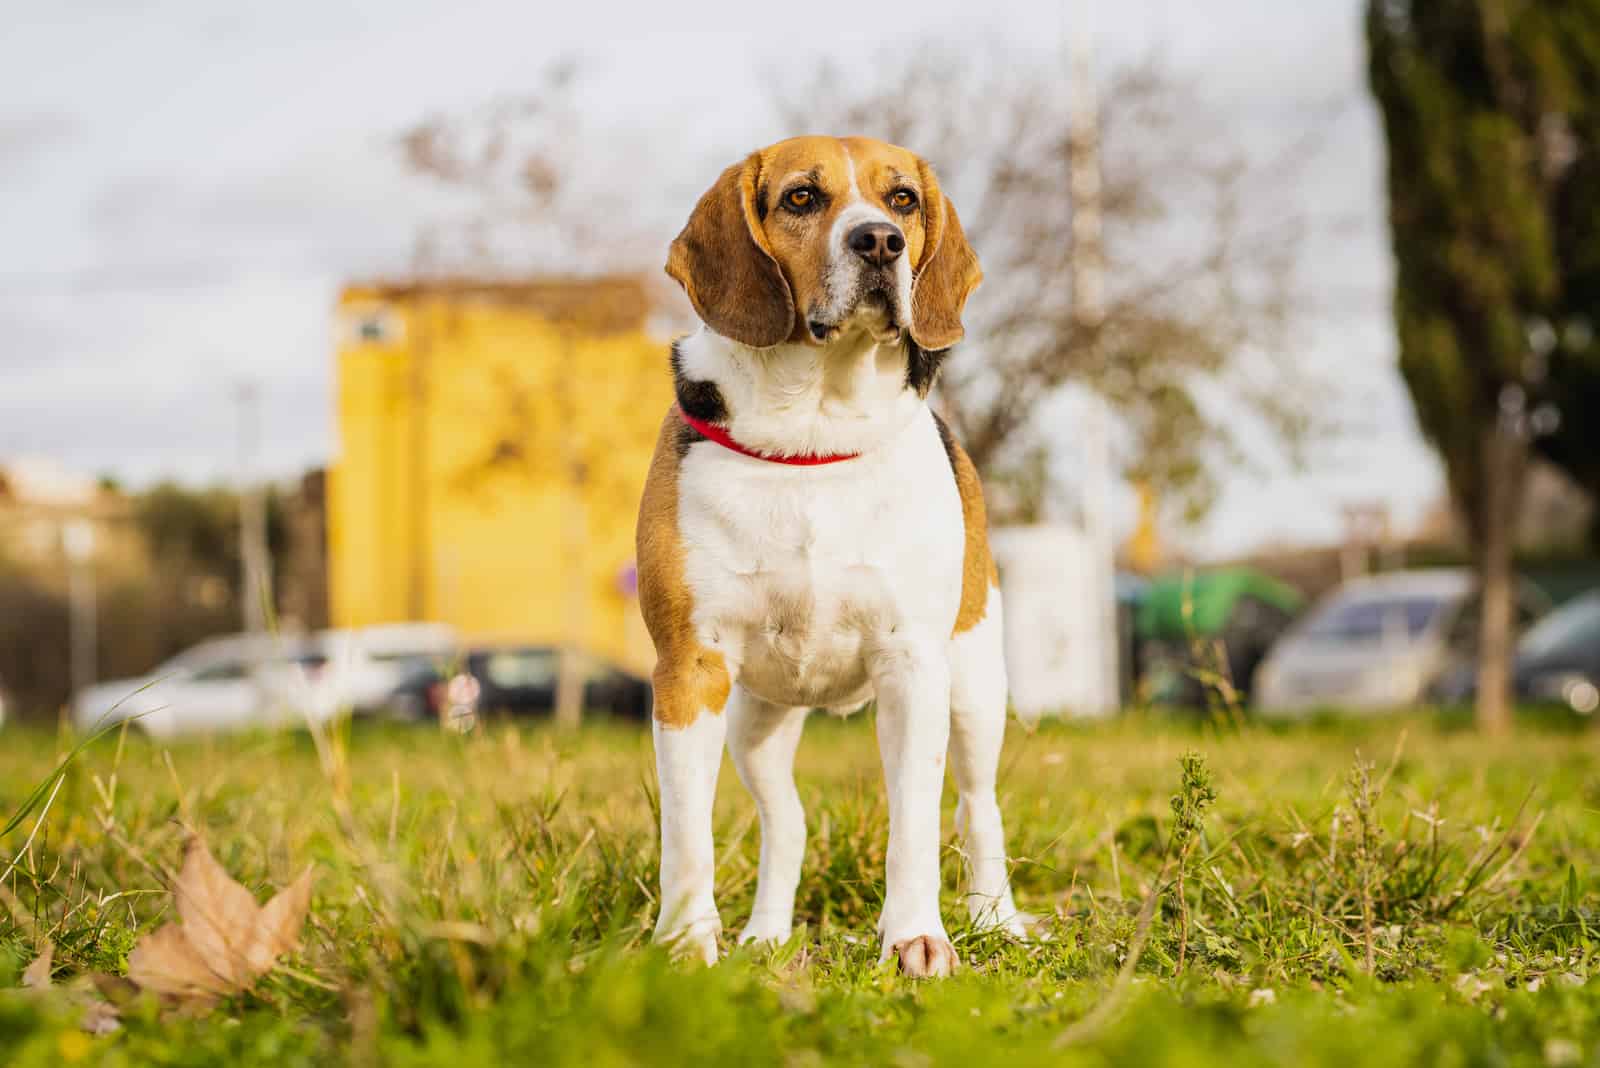 Coonhound Beagle Mix – Is This The Best Beagle Mix?